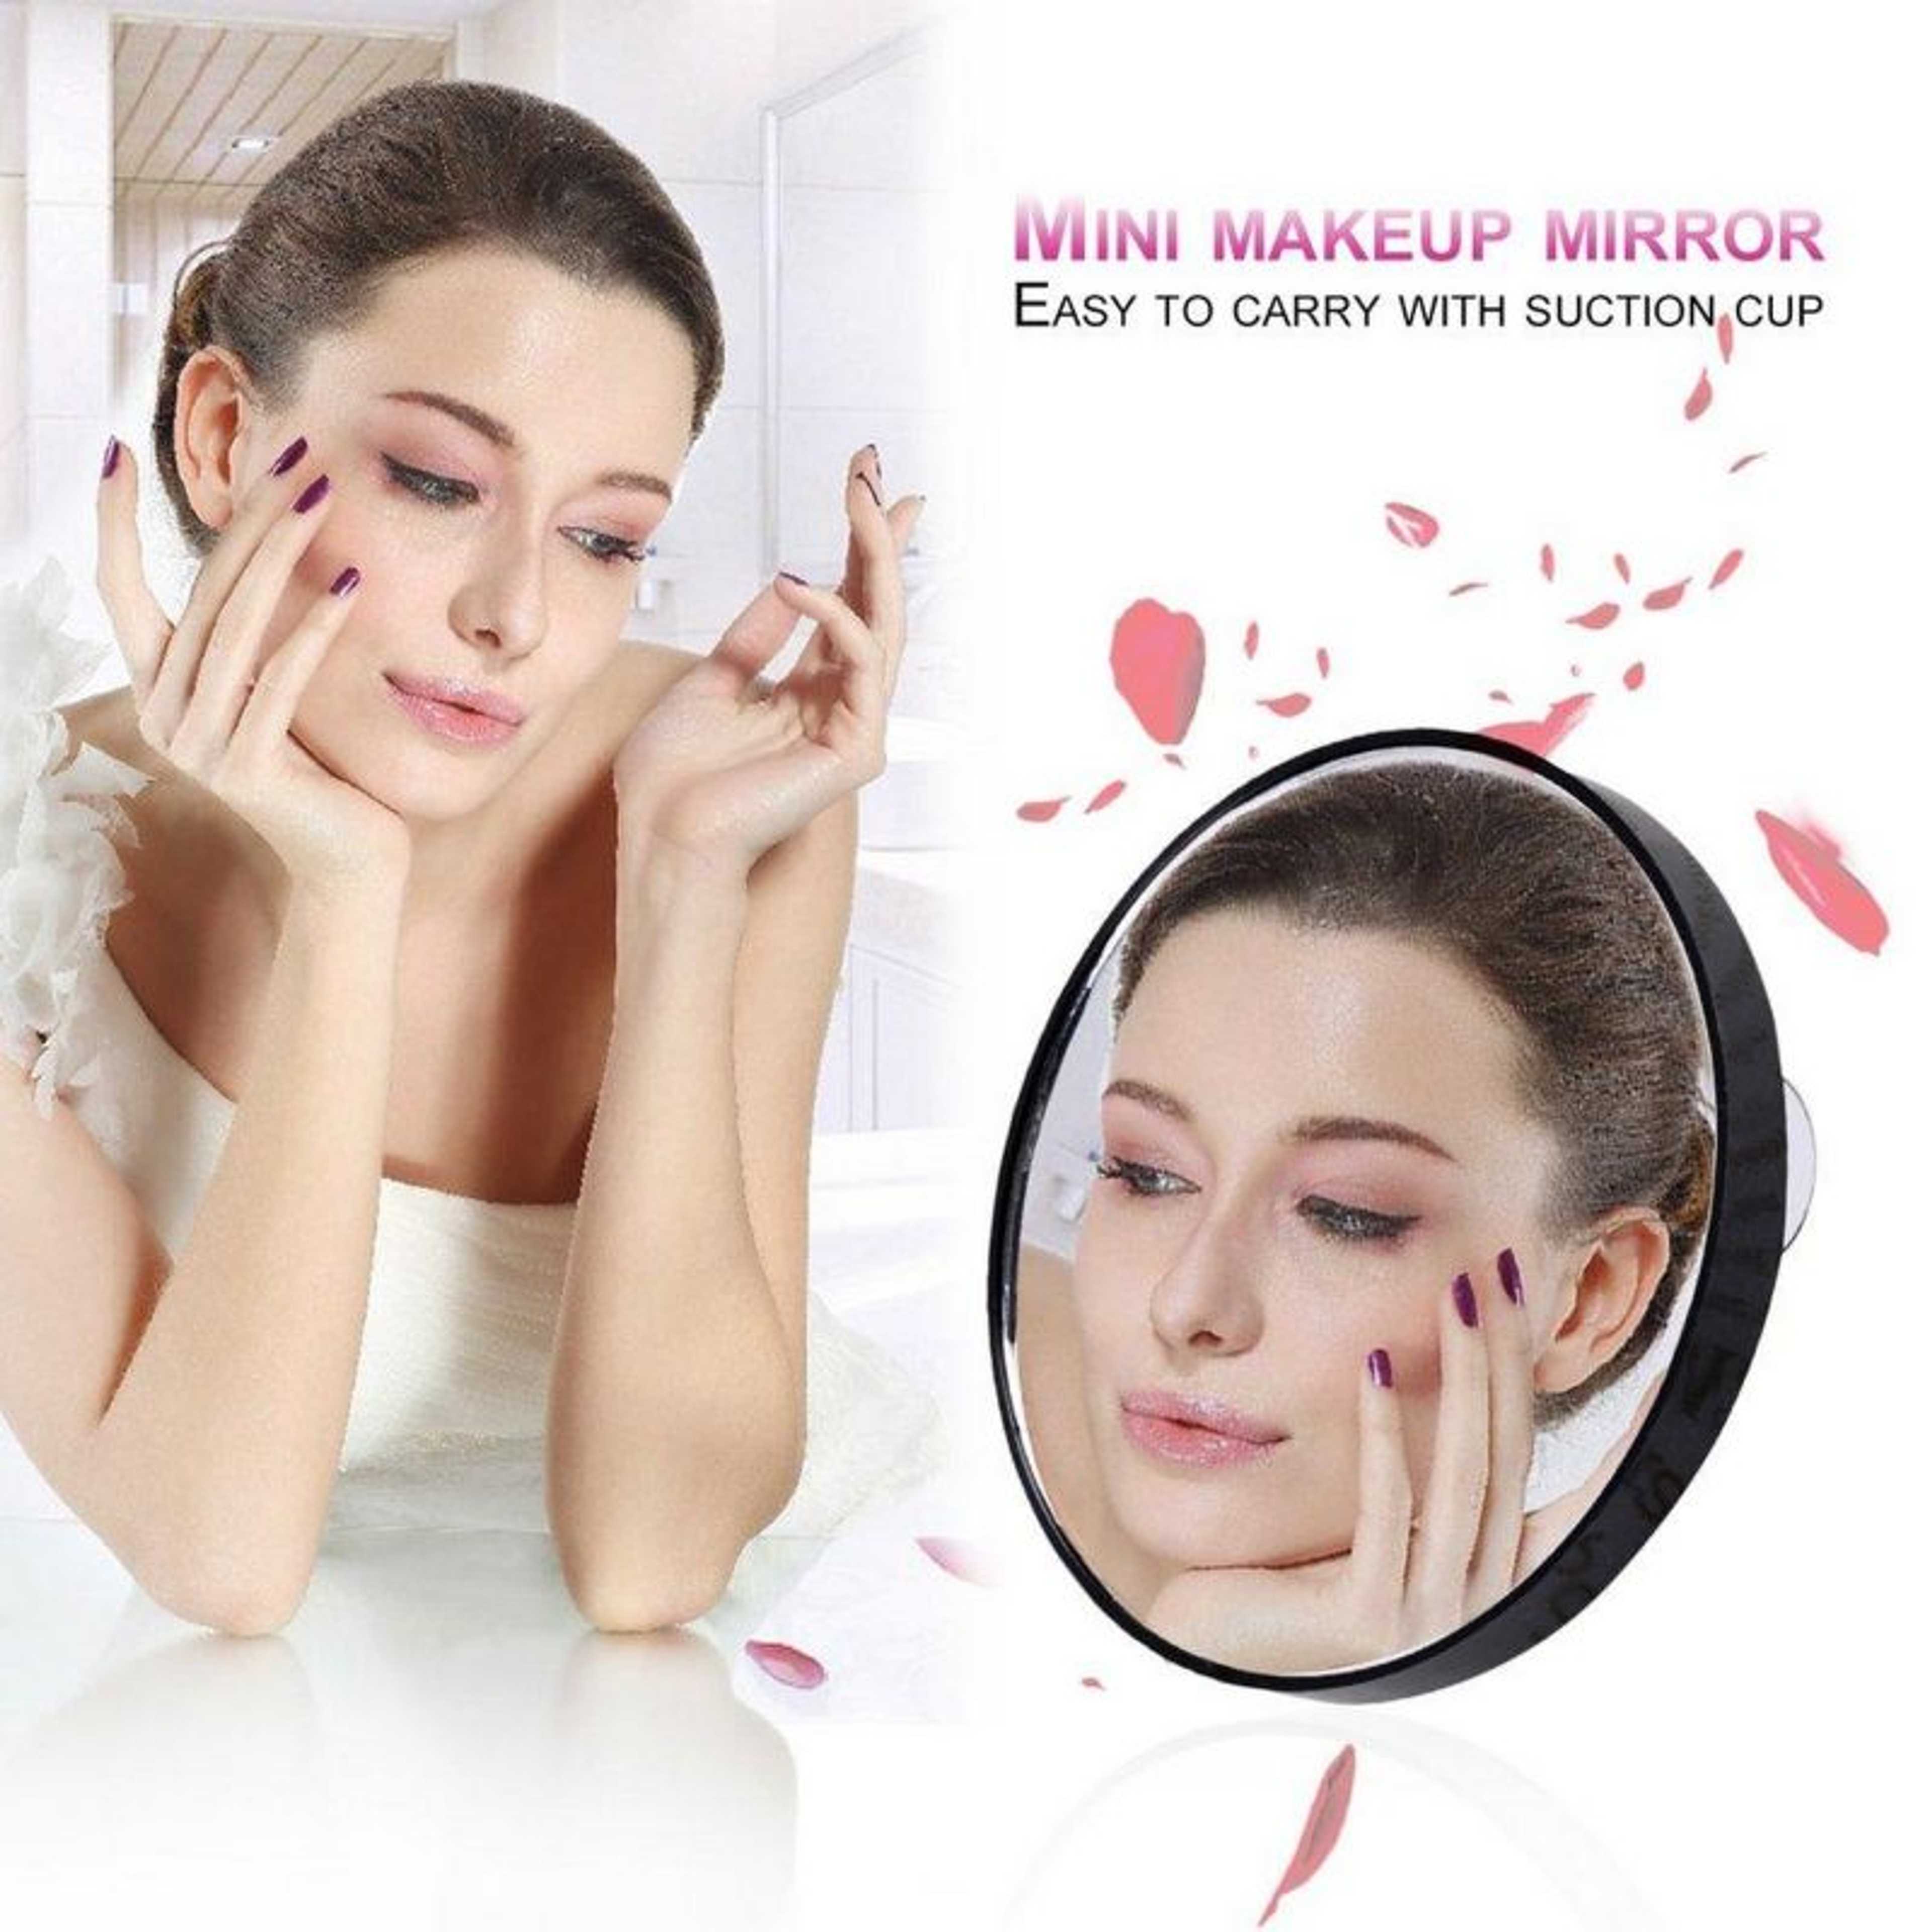 Round 3.5-inches Makeup Mirror With 10X Magnification & Suction Cups, 10X Magnifying Makeup Mirror, Mini Round Makeup Mirror, Magnifying Mirror